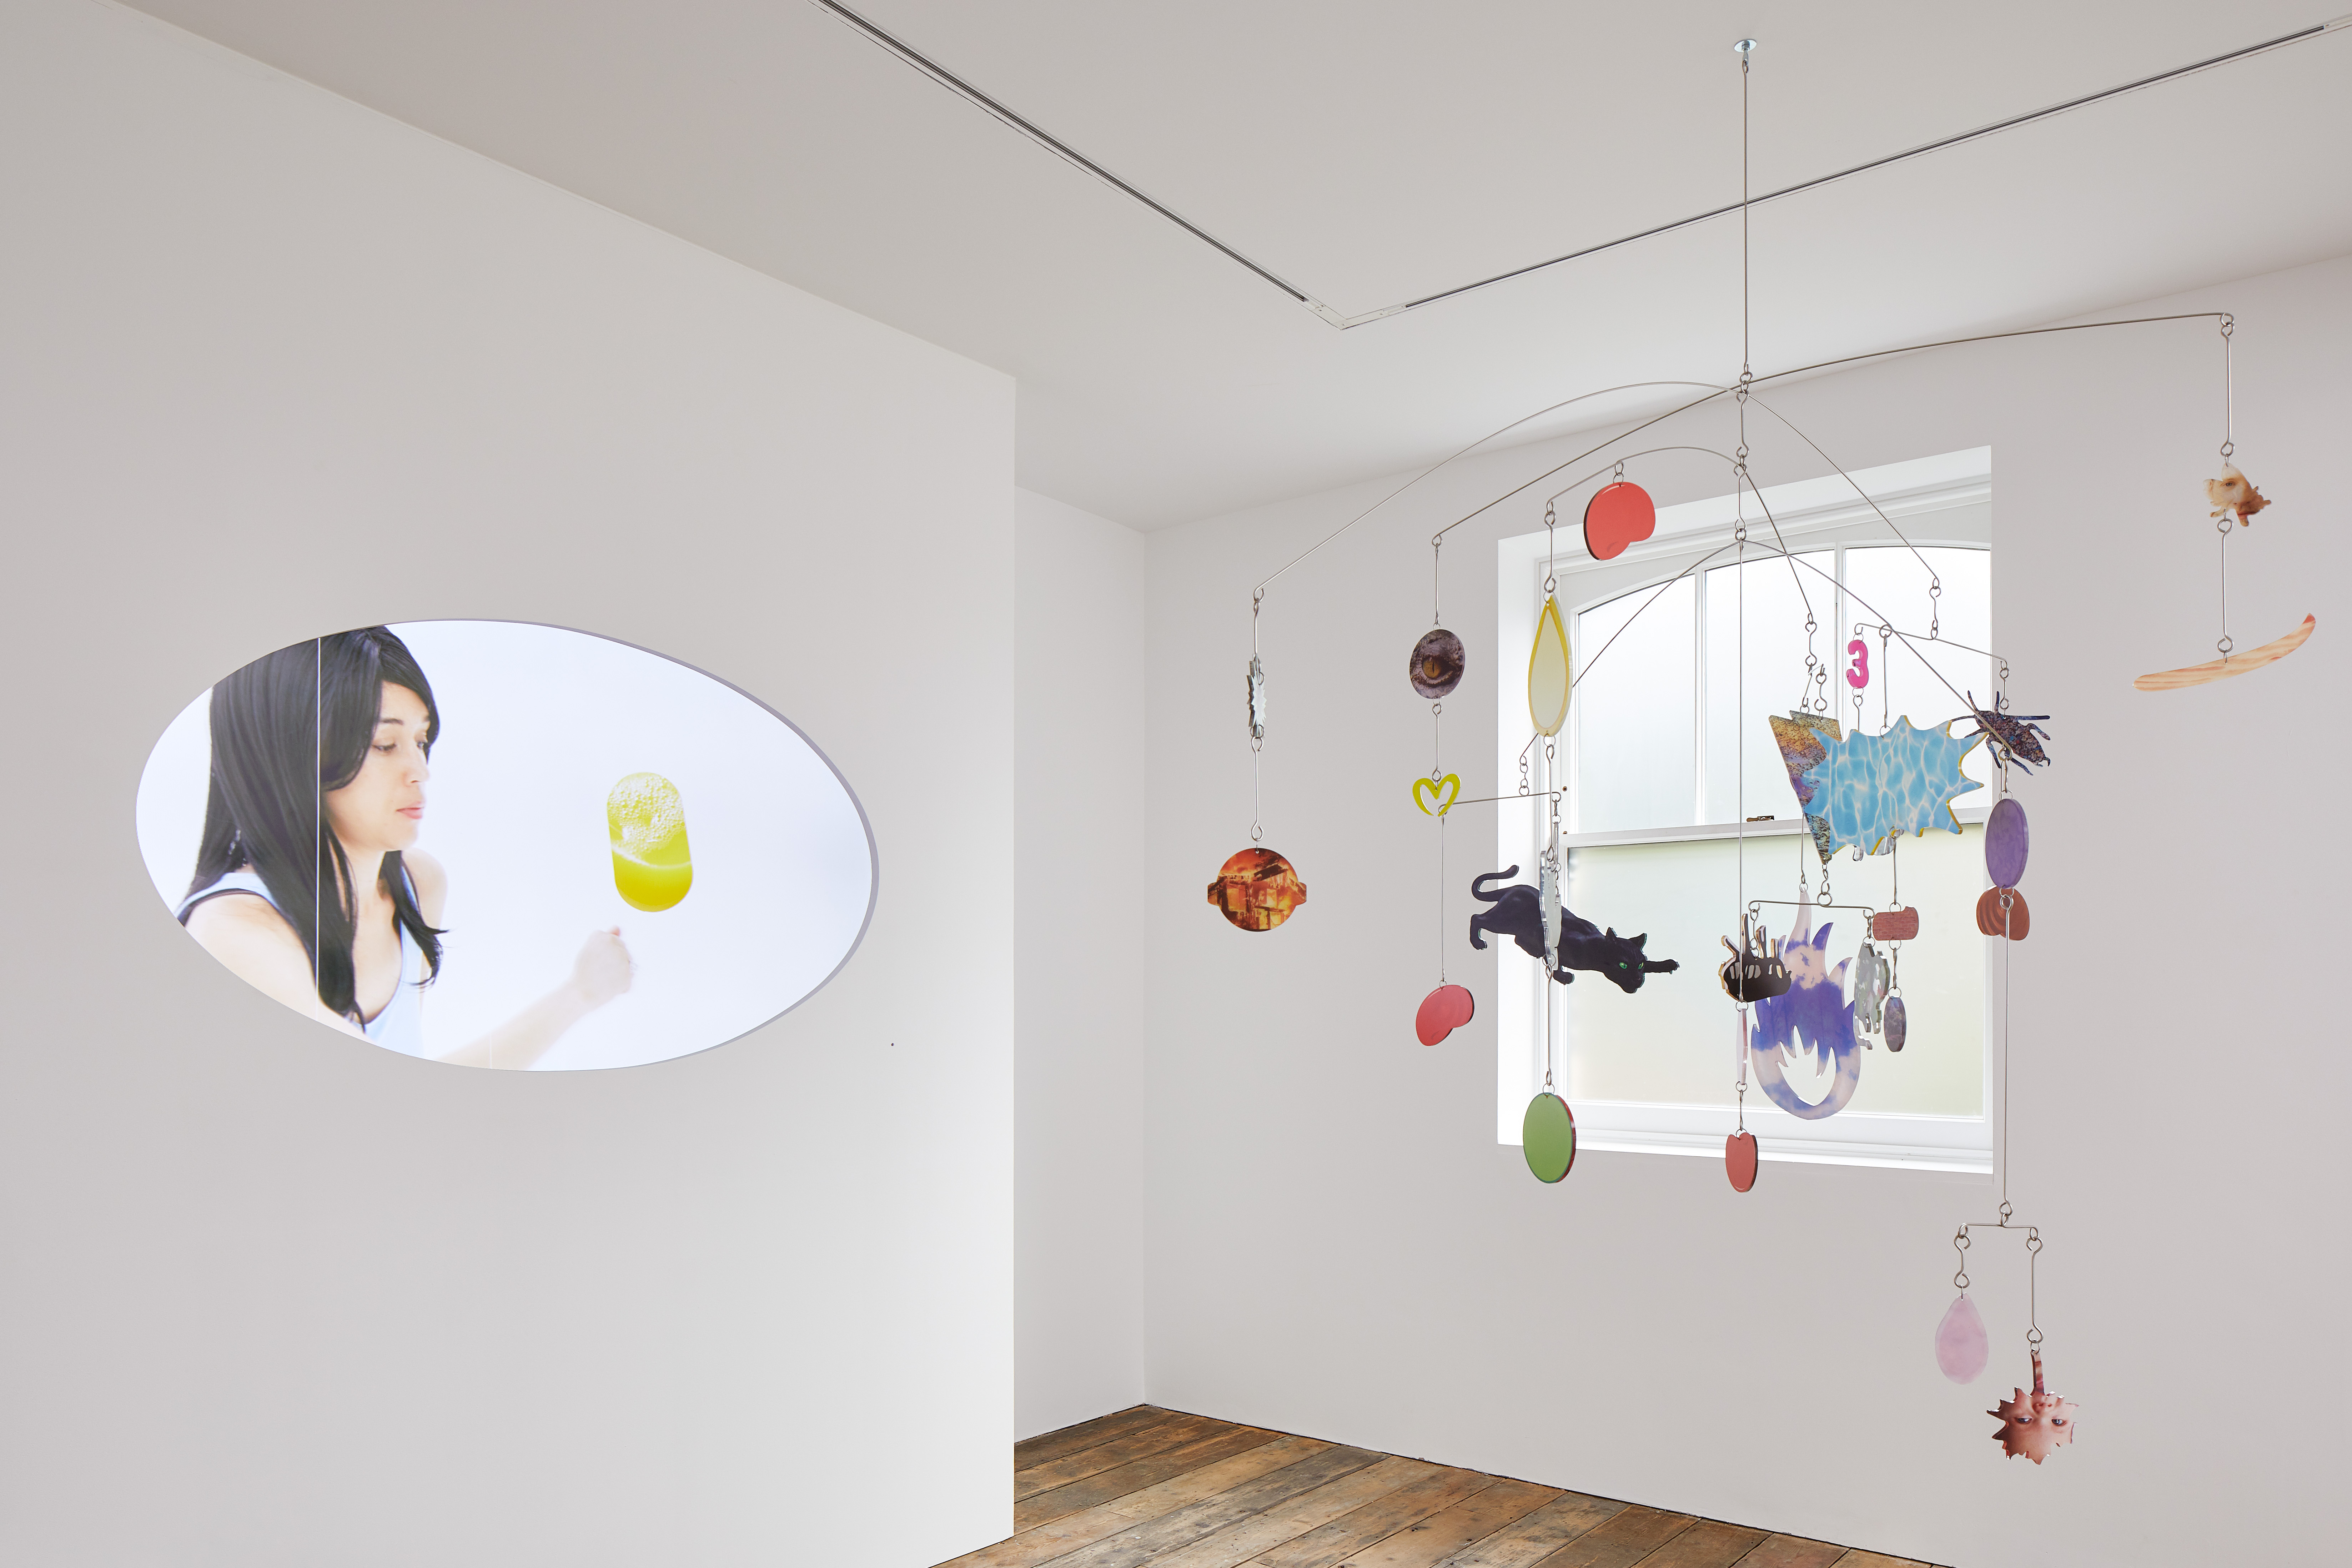 Installation view of KNOCK KNOCK. Pictured: She (2017) and KEEP OUT OF REACH OF CHILDREN (2018) by Danielle Dean. Photo: Andy Stagg